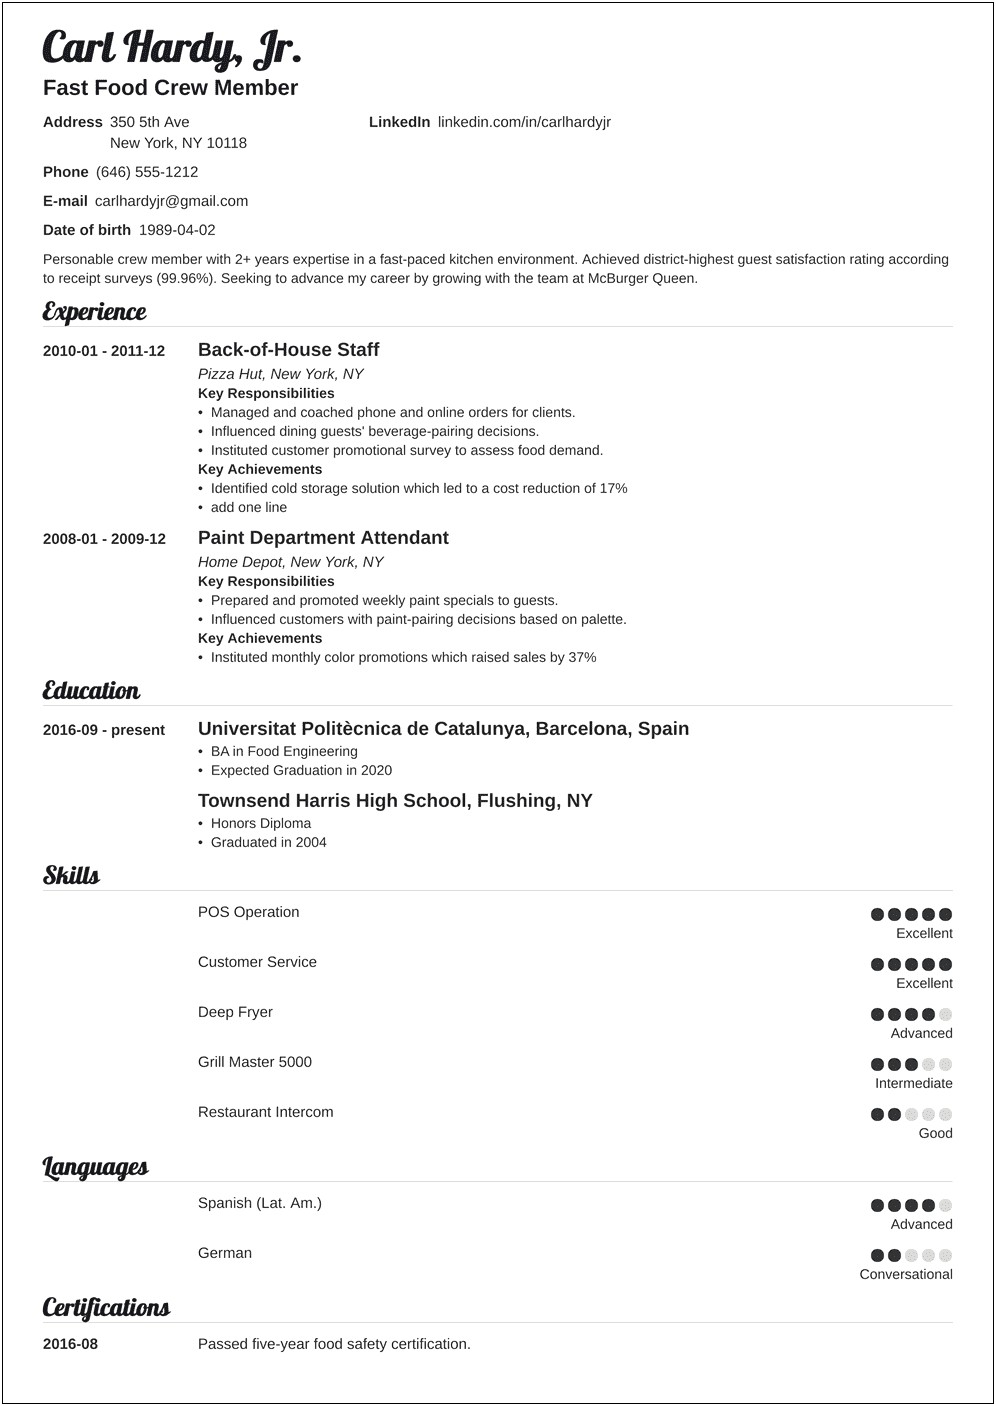 Resume Objective For Fast Food Job